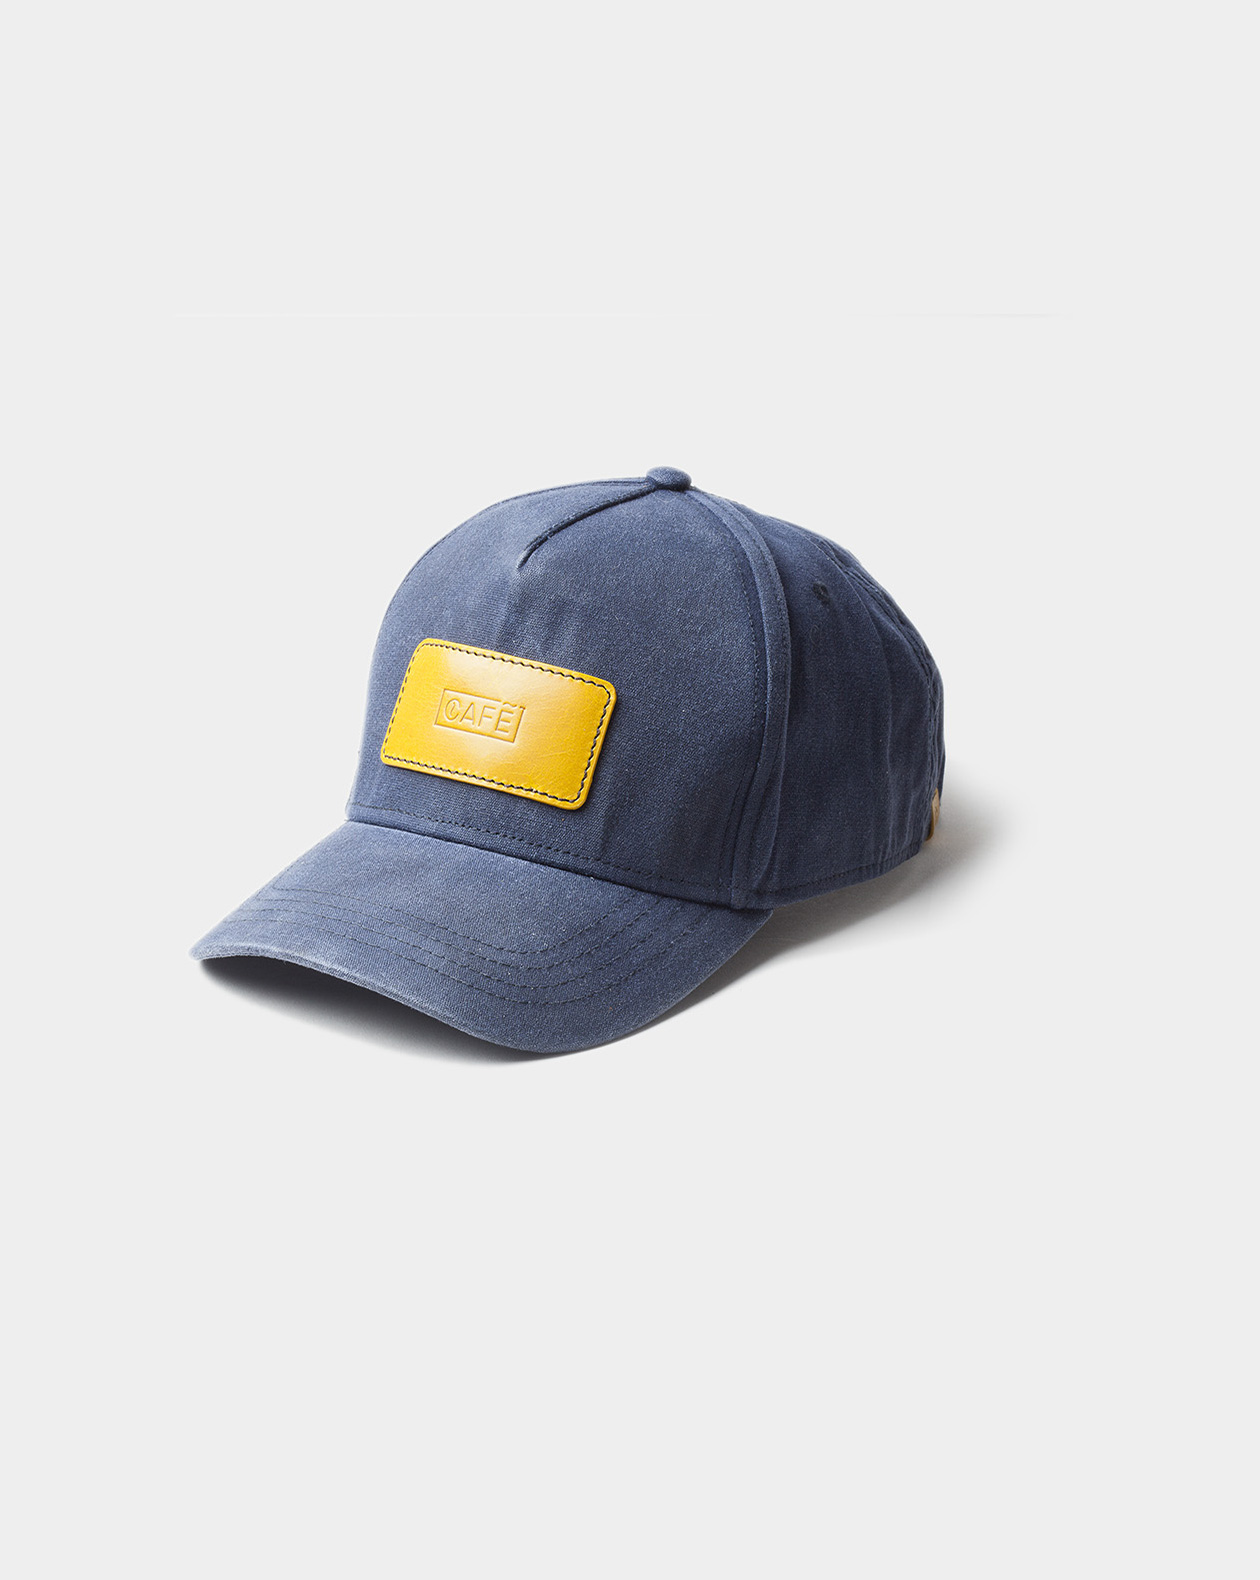 leather cap yellow side